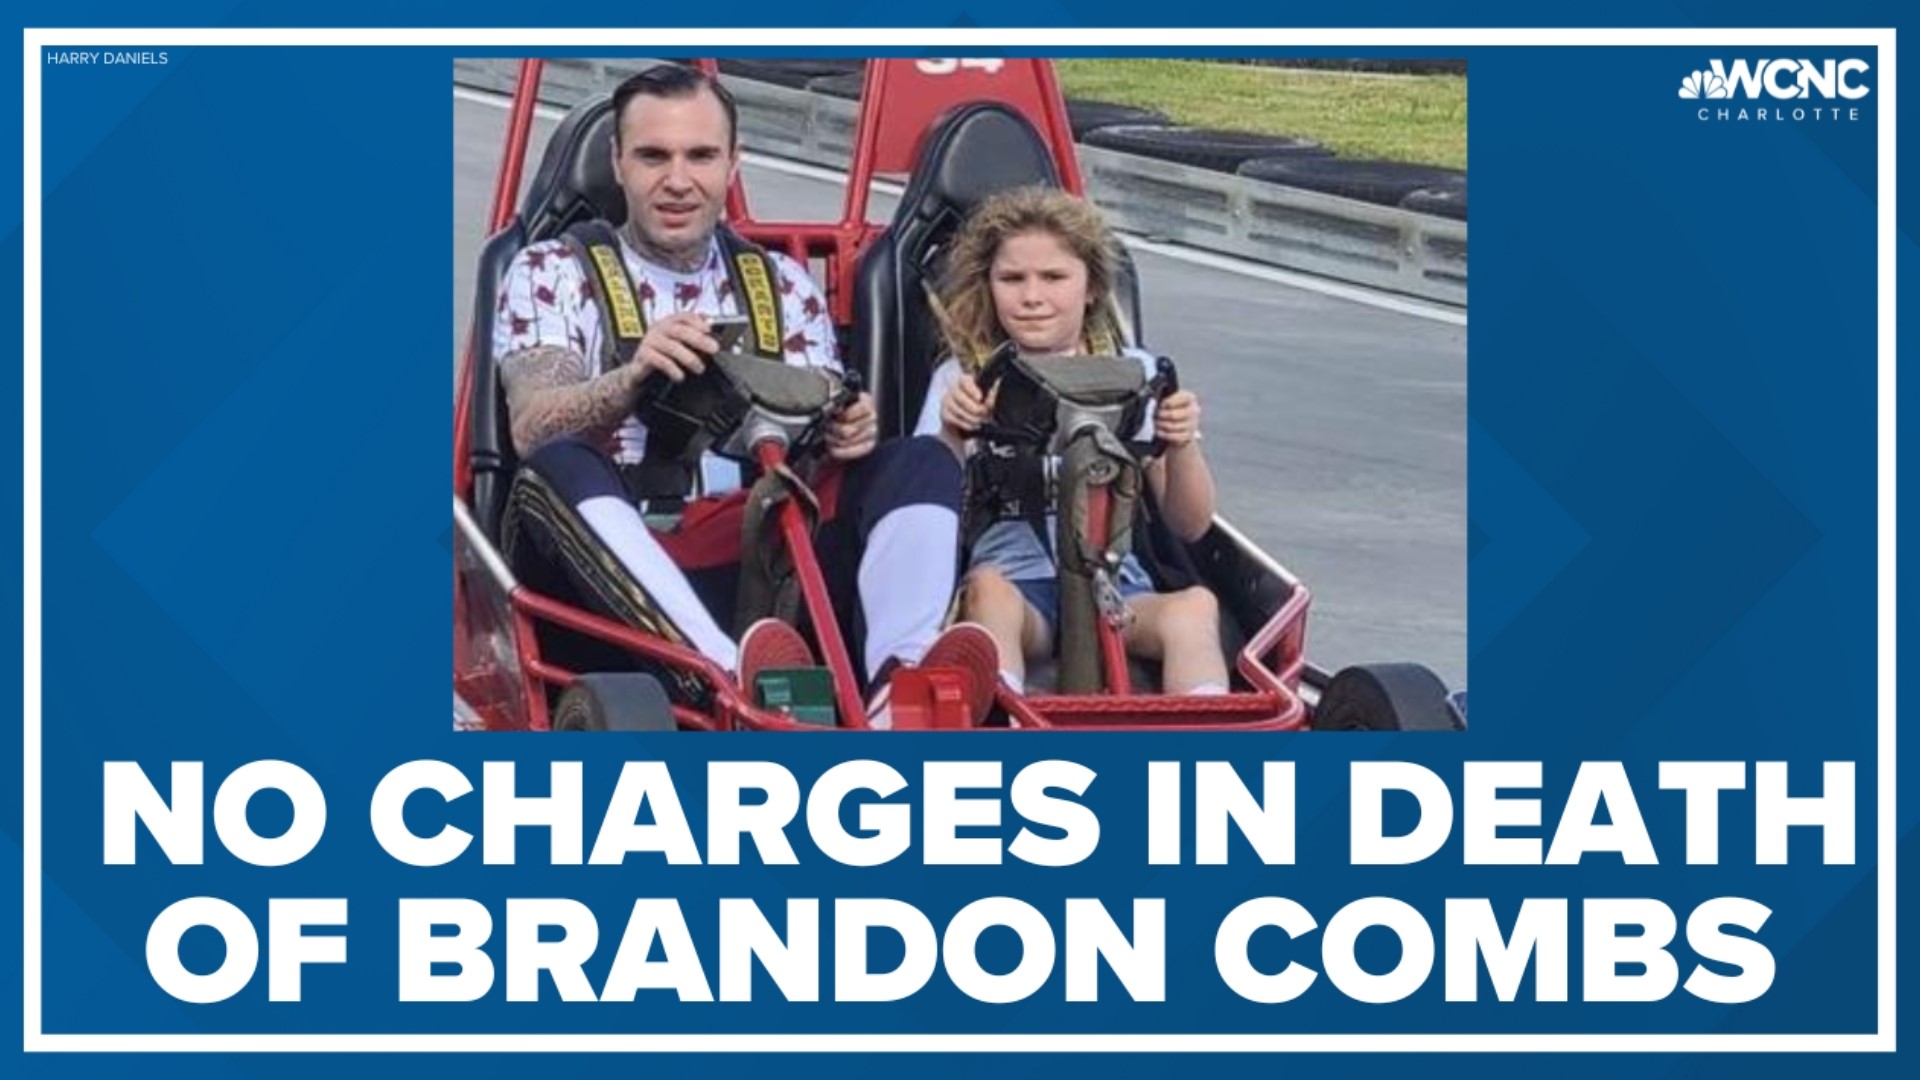 According to the District Attorney's Office, no charges will be filed in the death of Brandon Combs.